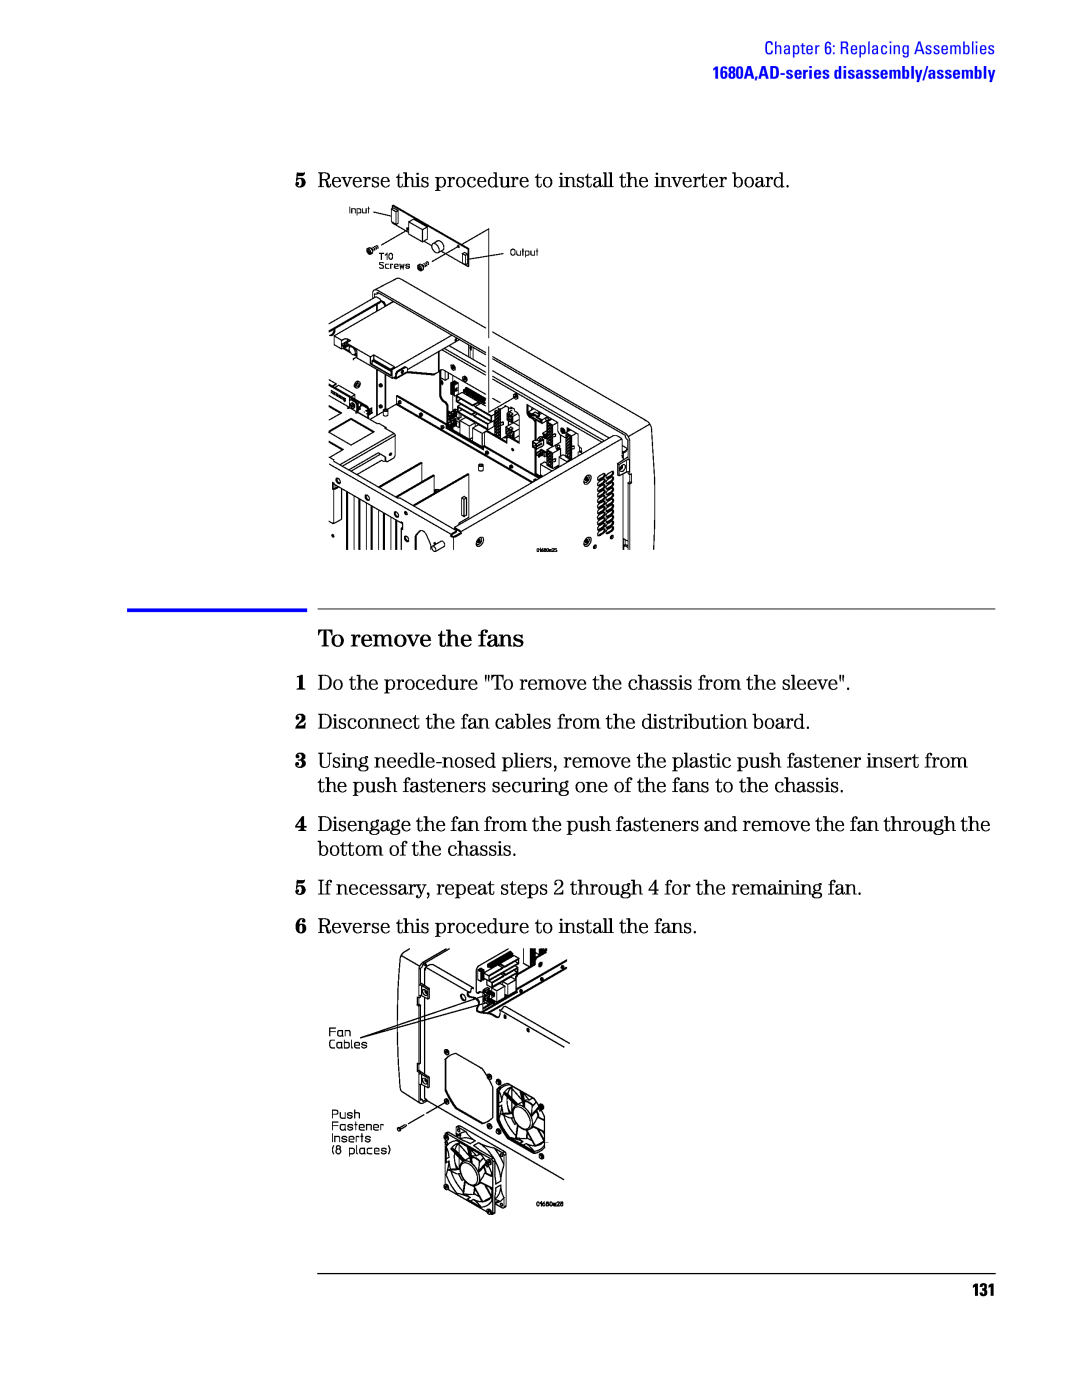 Agilent Technologies 1690, 1680 manual To remove the fans 